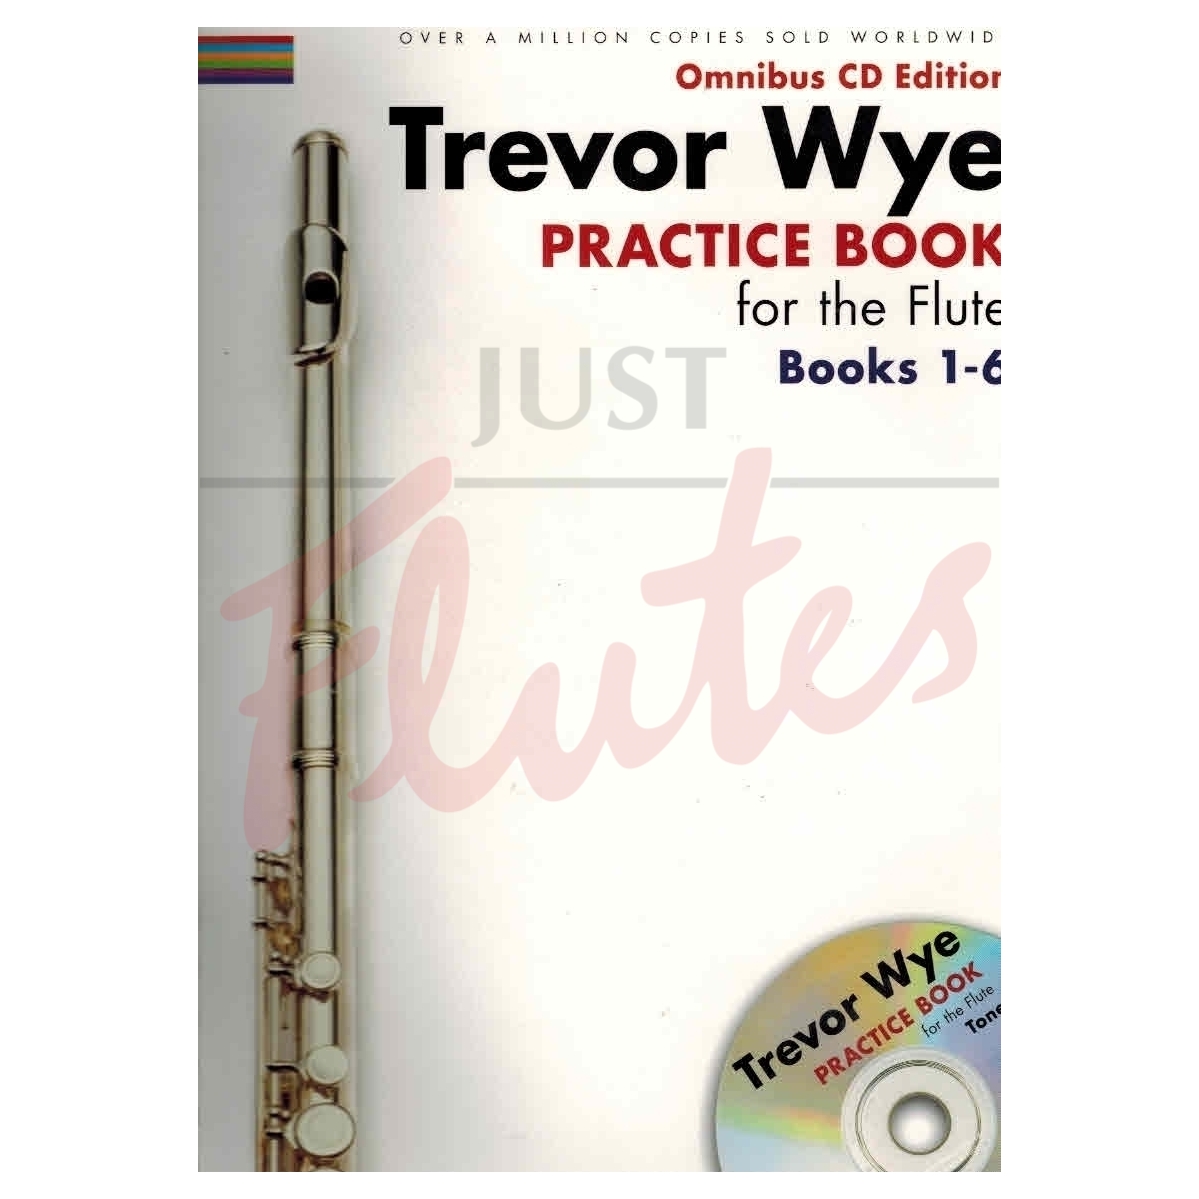 Trevor-Wye--Practice-Book-for-the-Flute--Omnibus-Edition-Books-16